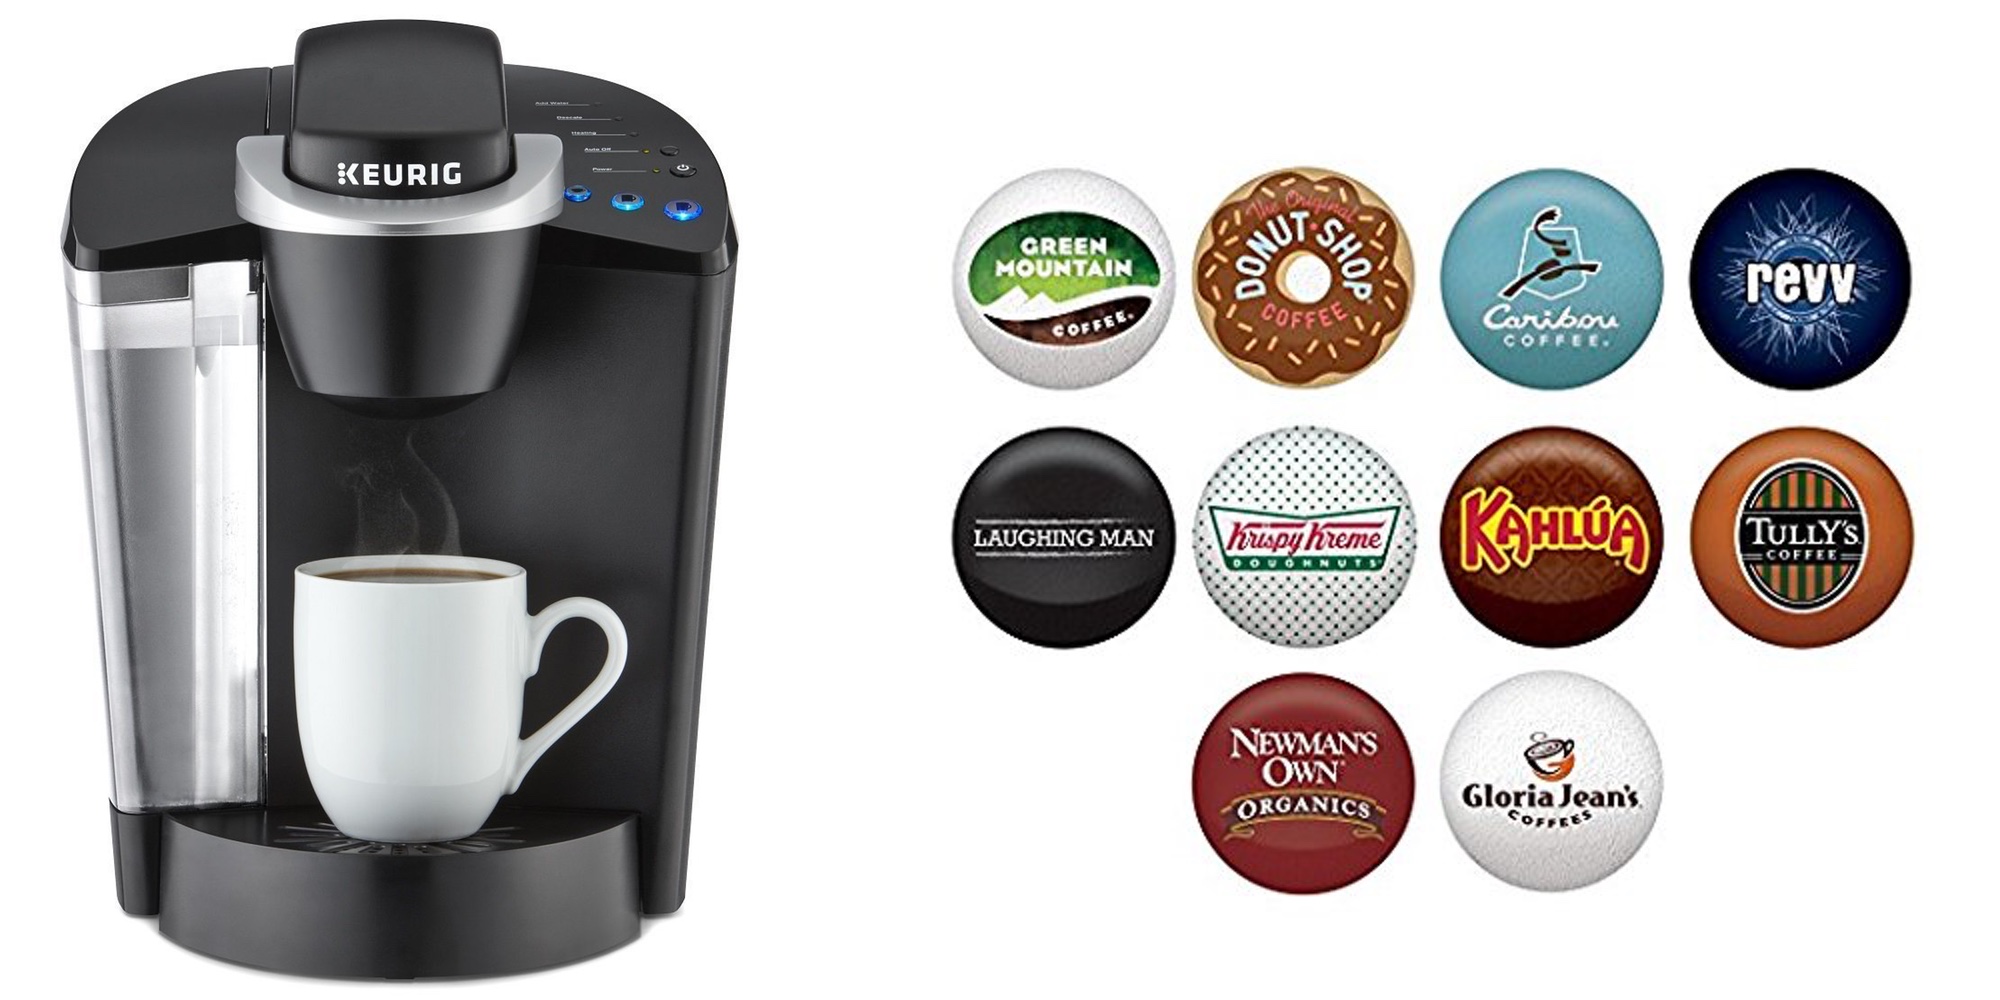 https://9to5toys.com/wp-content/uploads/sites/5/2017/11/k55-brewer-40ct-variety-pack-of-k-cups.jpg